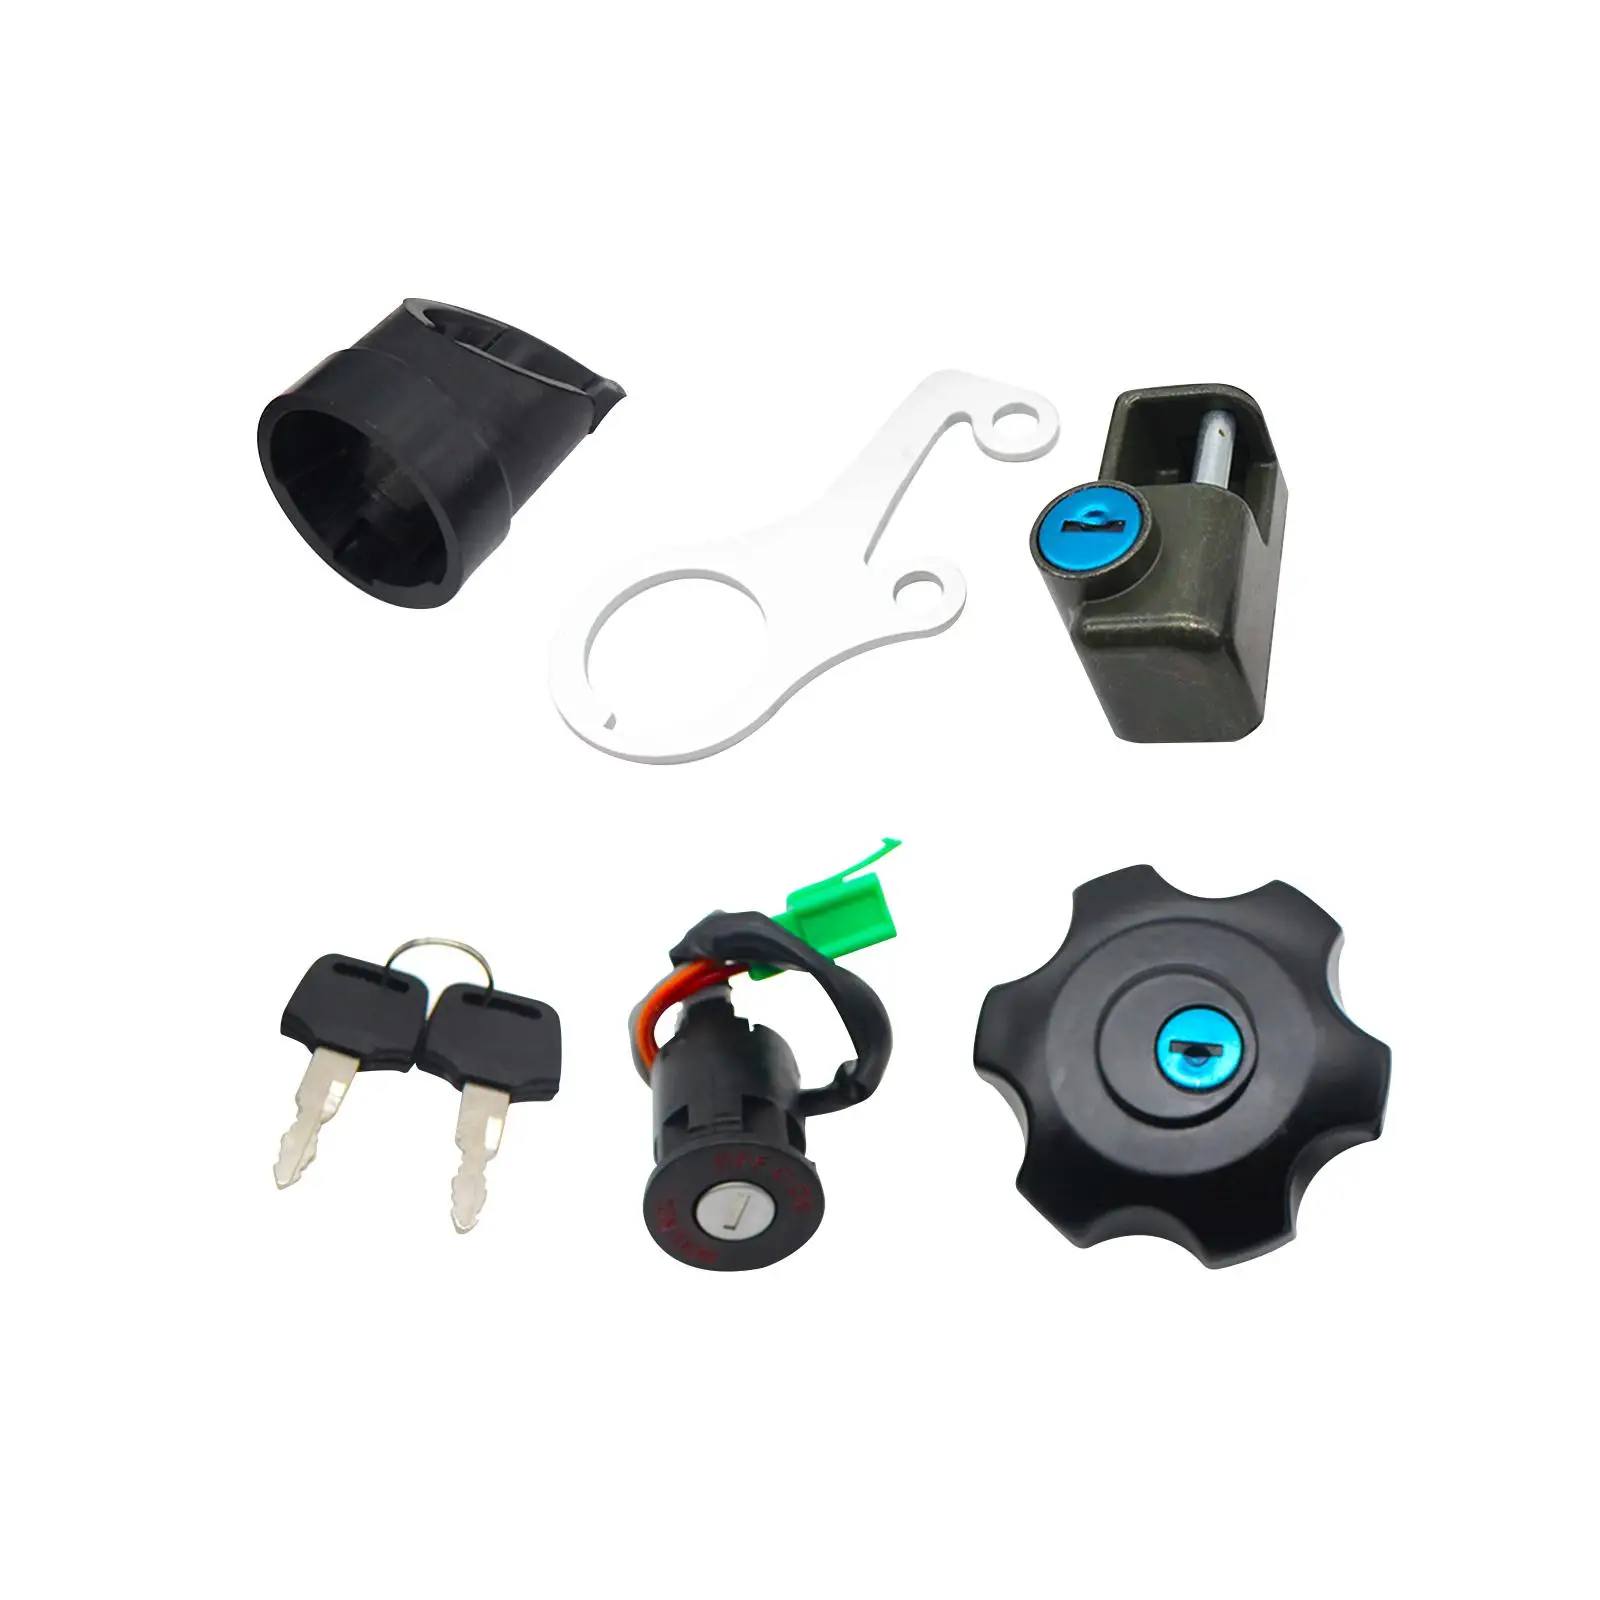 Ignition Switch Gas Fuel Tank Cap Cover Seat Lock Kit 37101-29811 44200-29820 for Suzuki Drz400 Spare Parts Easy to Install